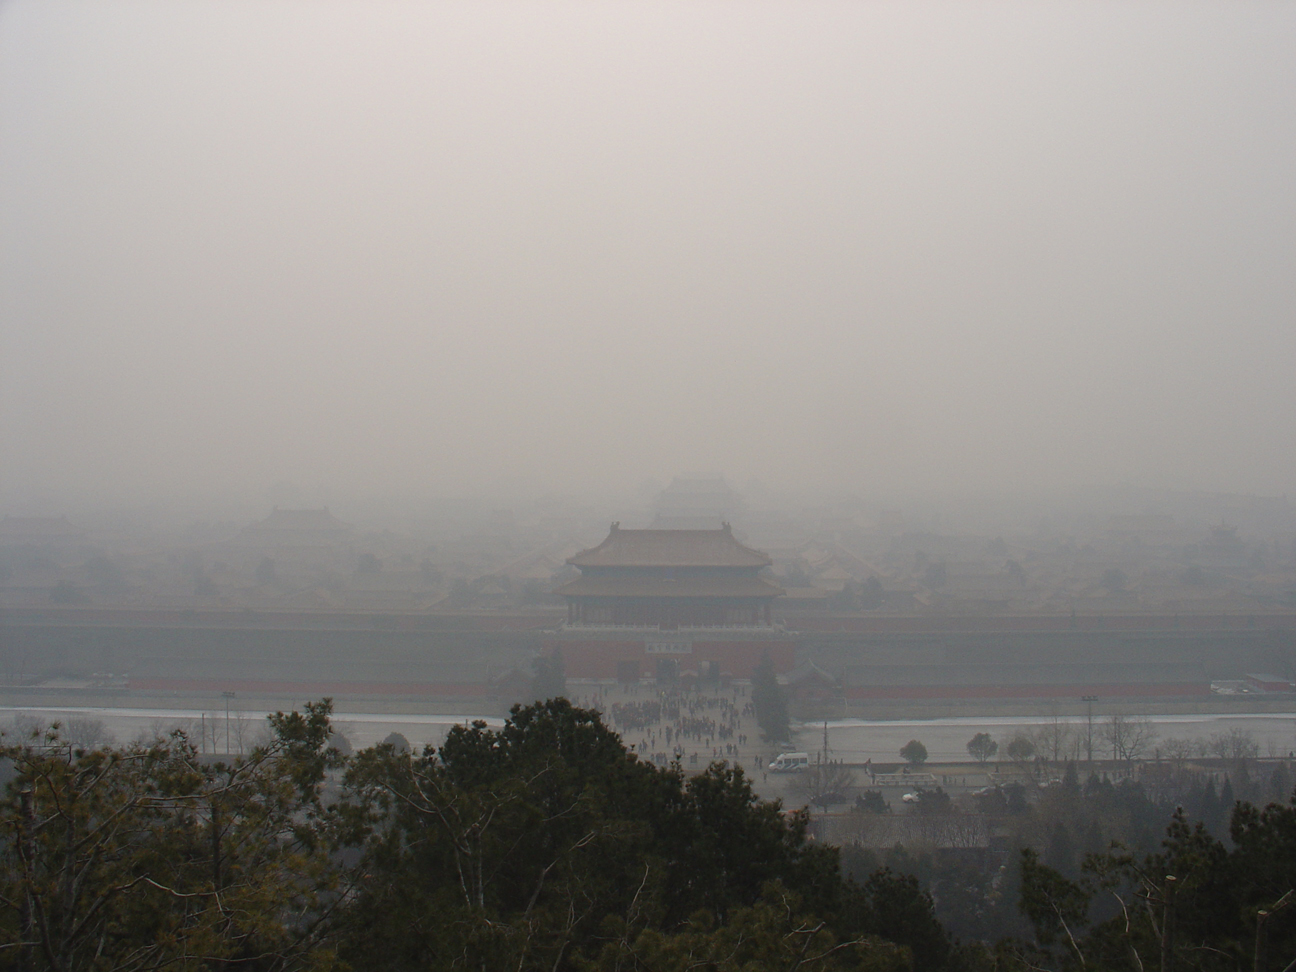 The Forbidden City photographed from higher ground